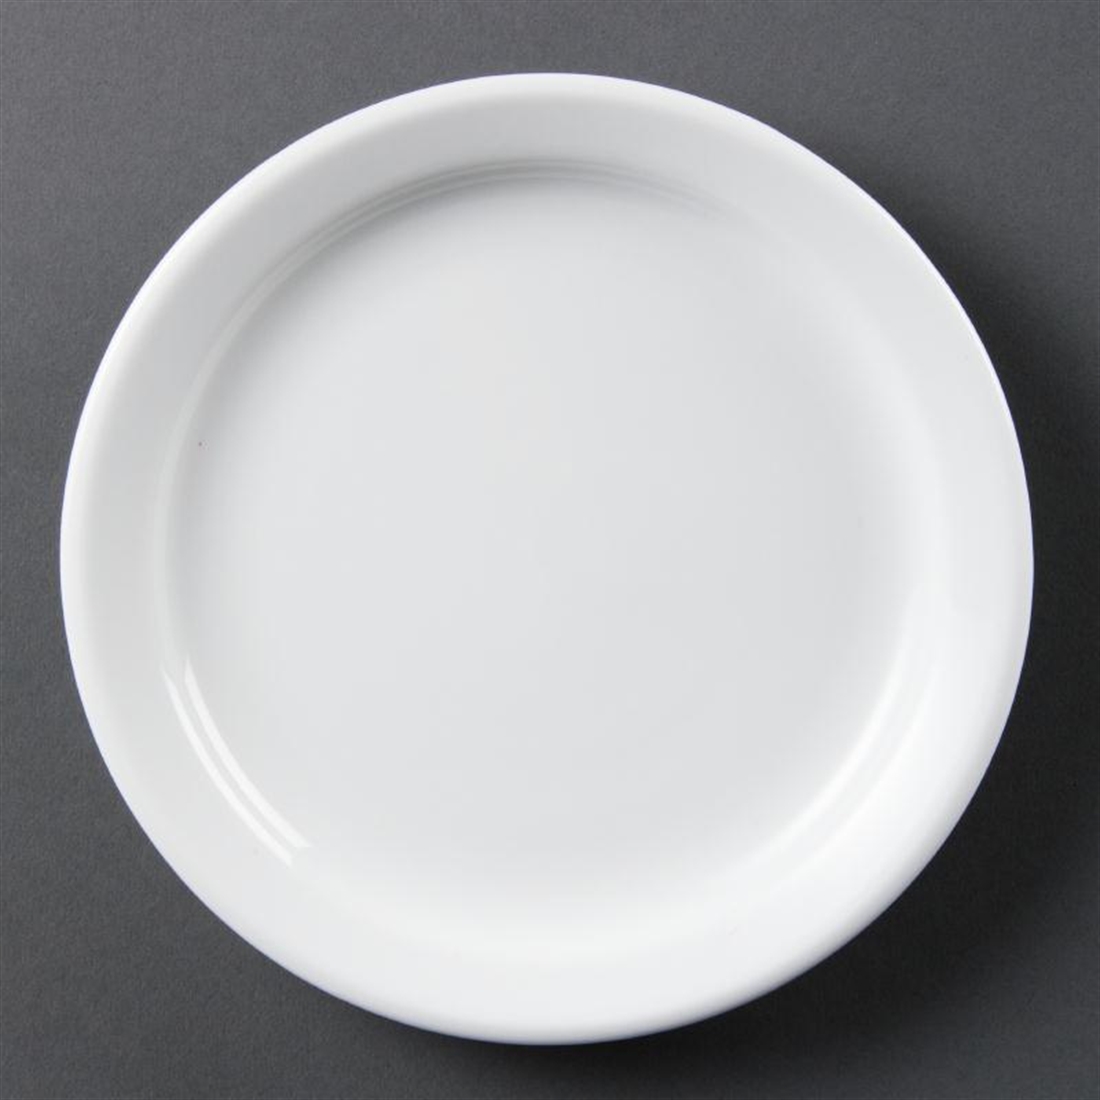 Olympia Whiteware Narrow Rimmed Plates 180mm